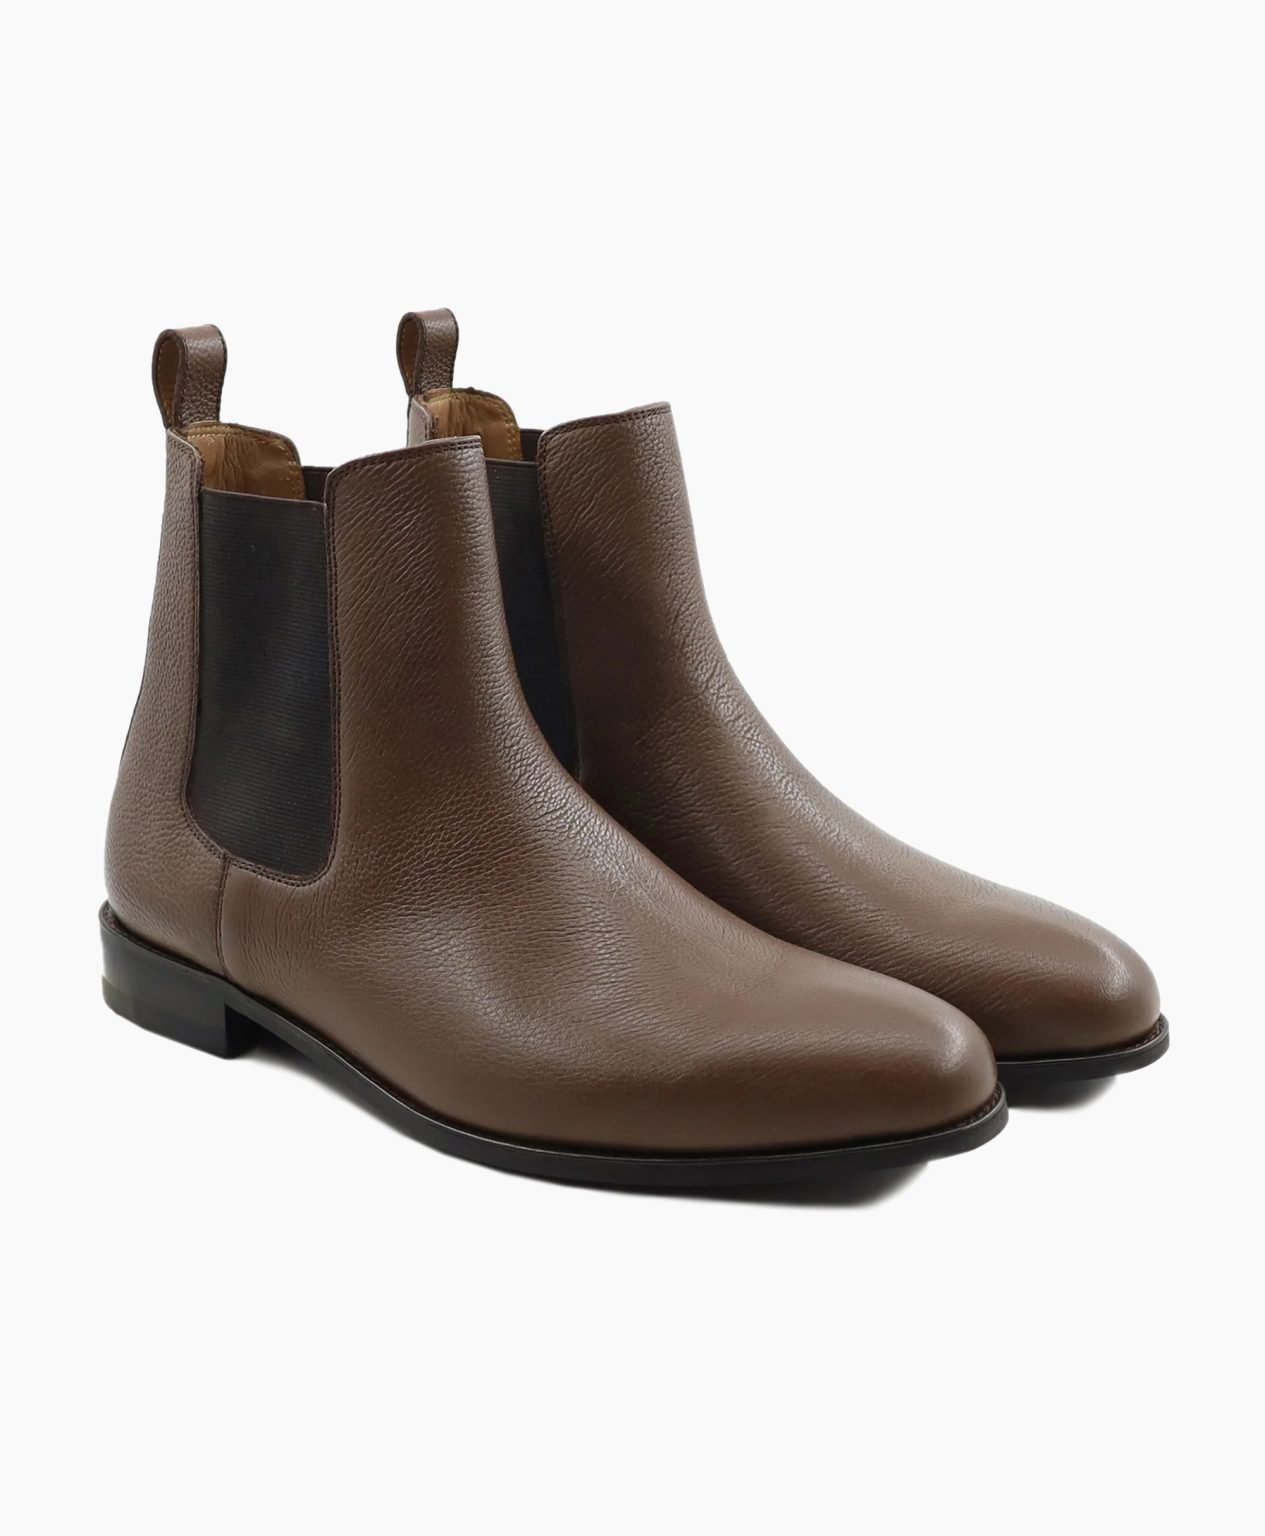 carlisle-chelsea-brown-leather-boot-image200